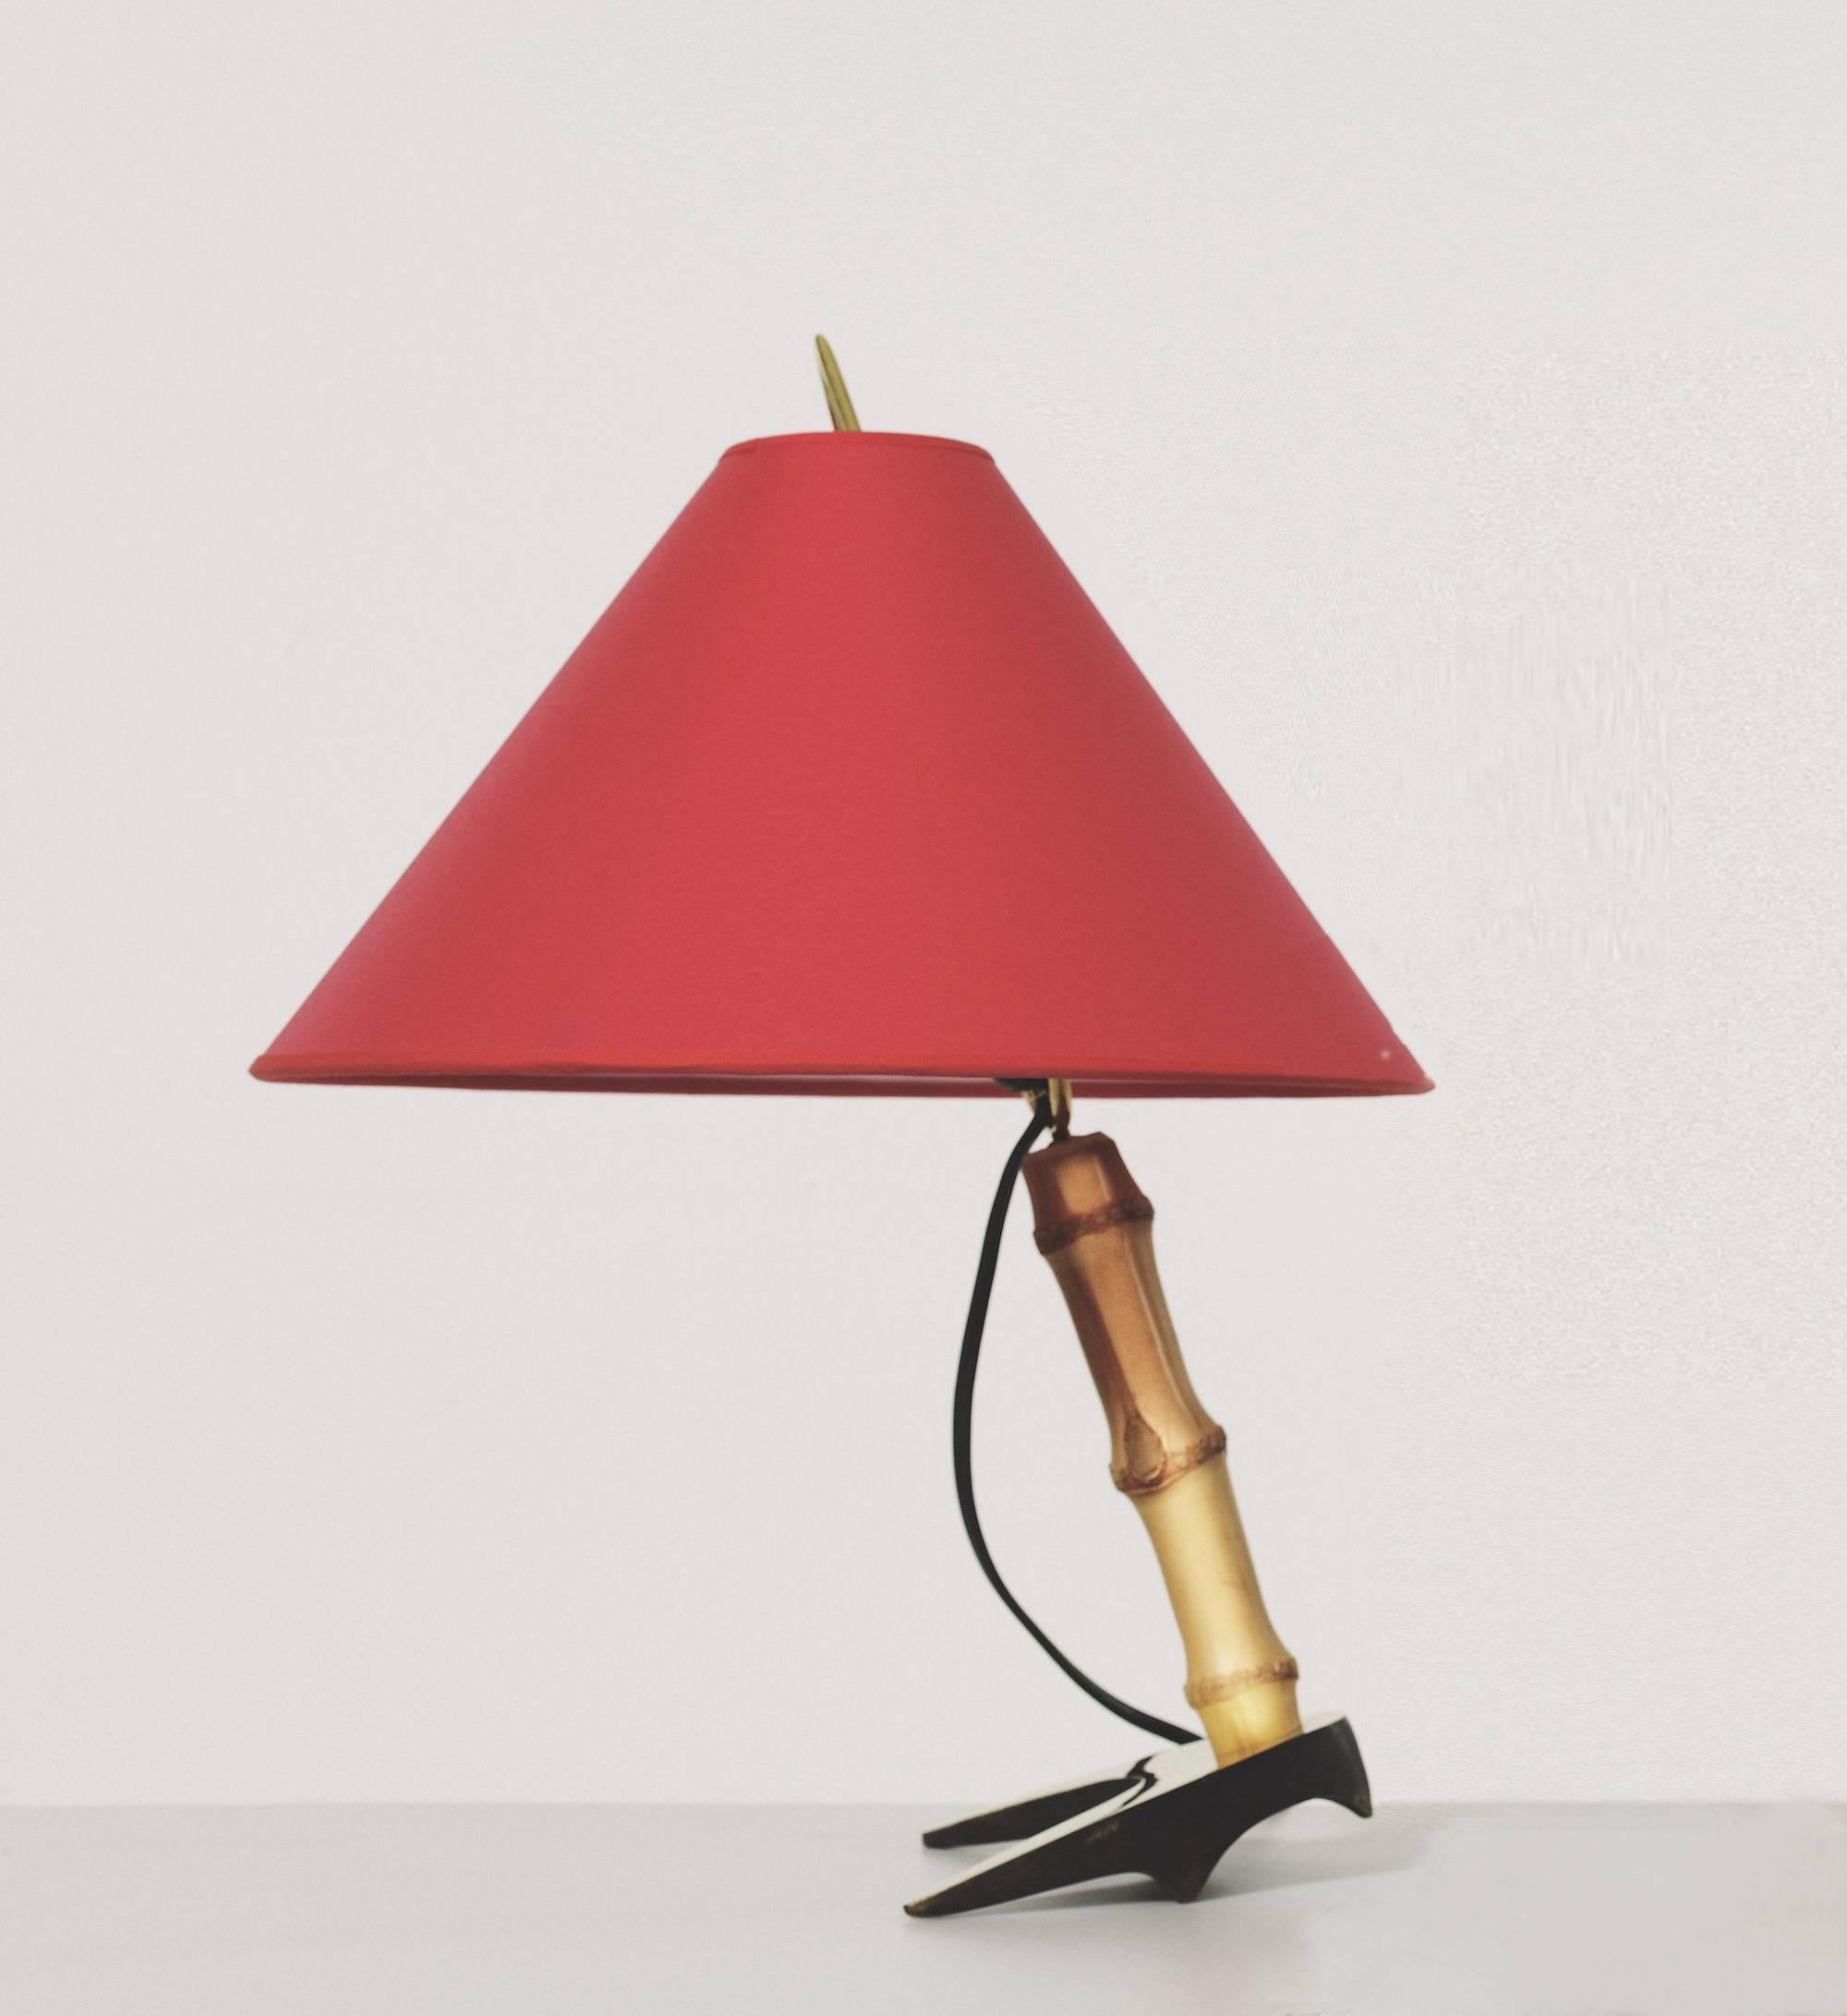 Carl Auböck 'Horseshoe' table lamp. Designed in the 1950s, these versatile and Minimalist Viennese table lamps are executed in bamboo and brass with a heavy horseshoe-shaped solid brass base. Includes sculptural hard paper shade by Werkstätte Carl